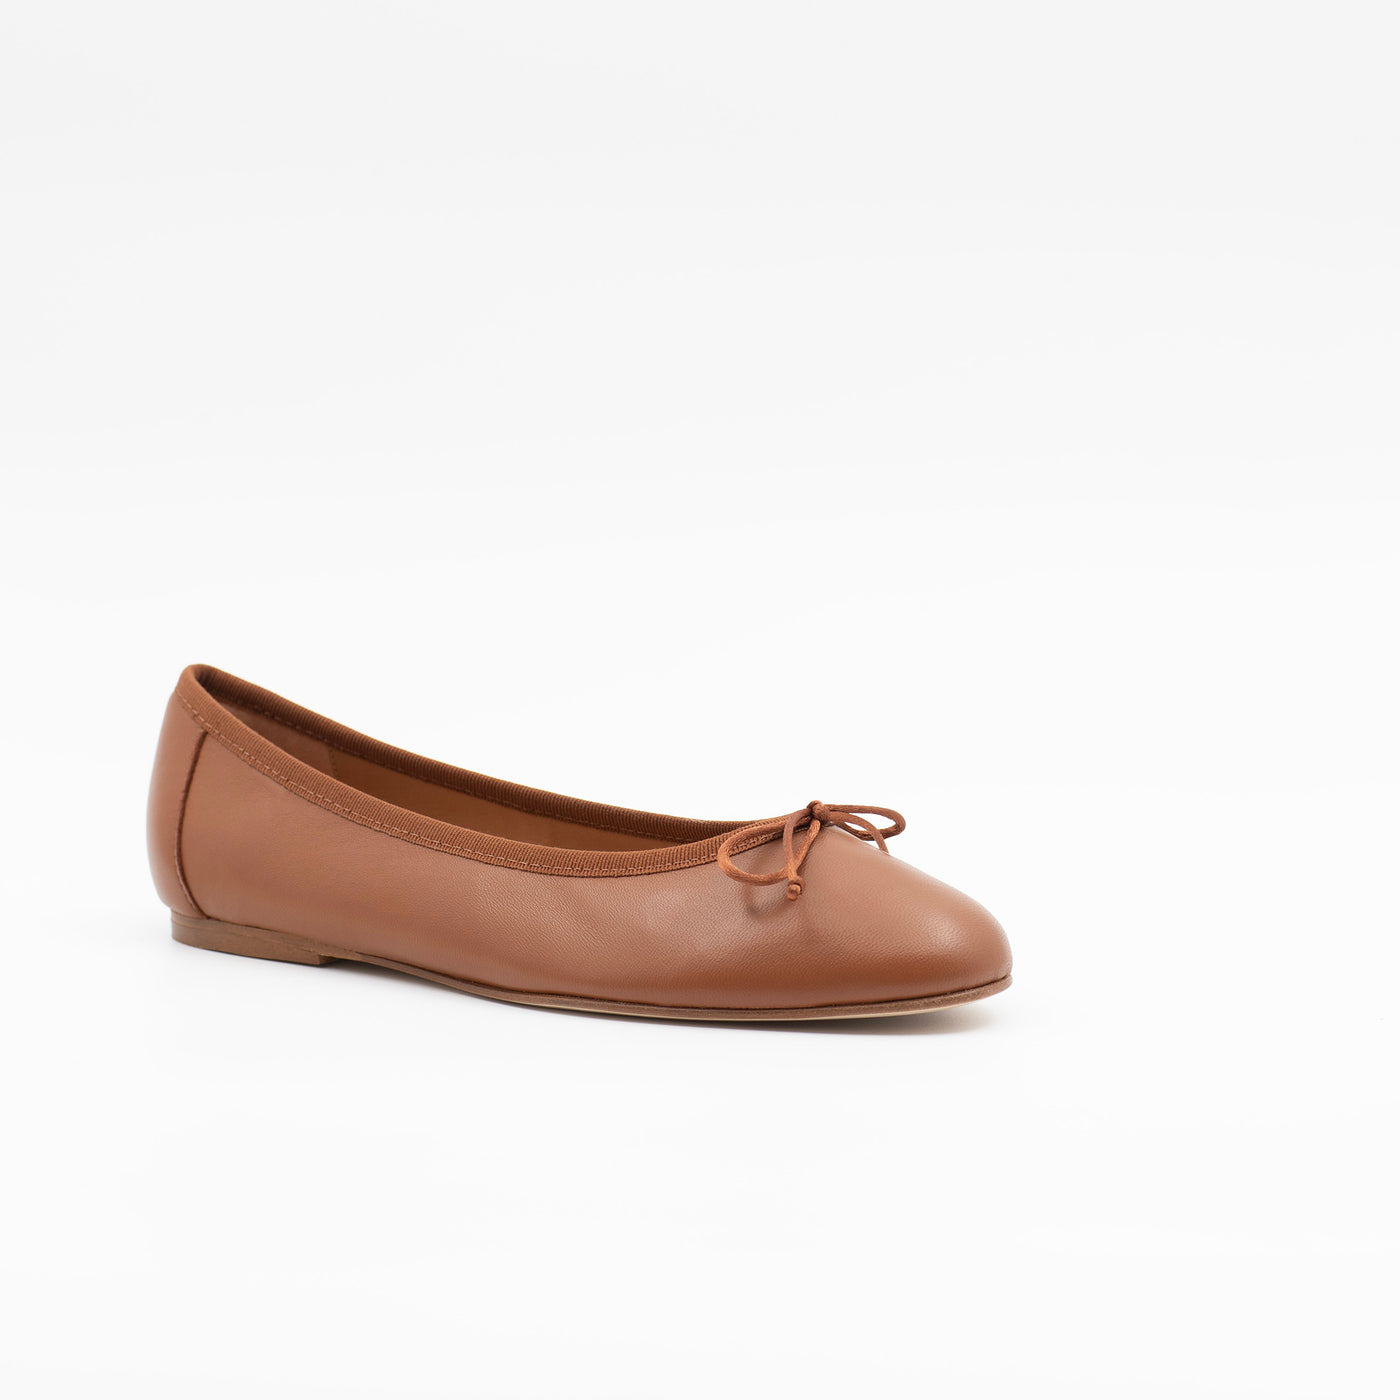 Ballet flat in brown leather